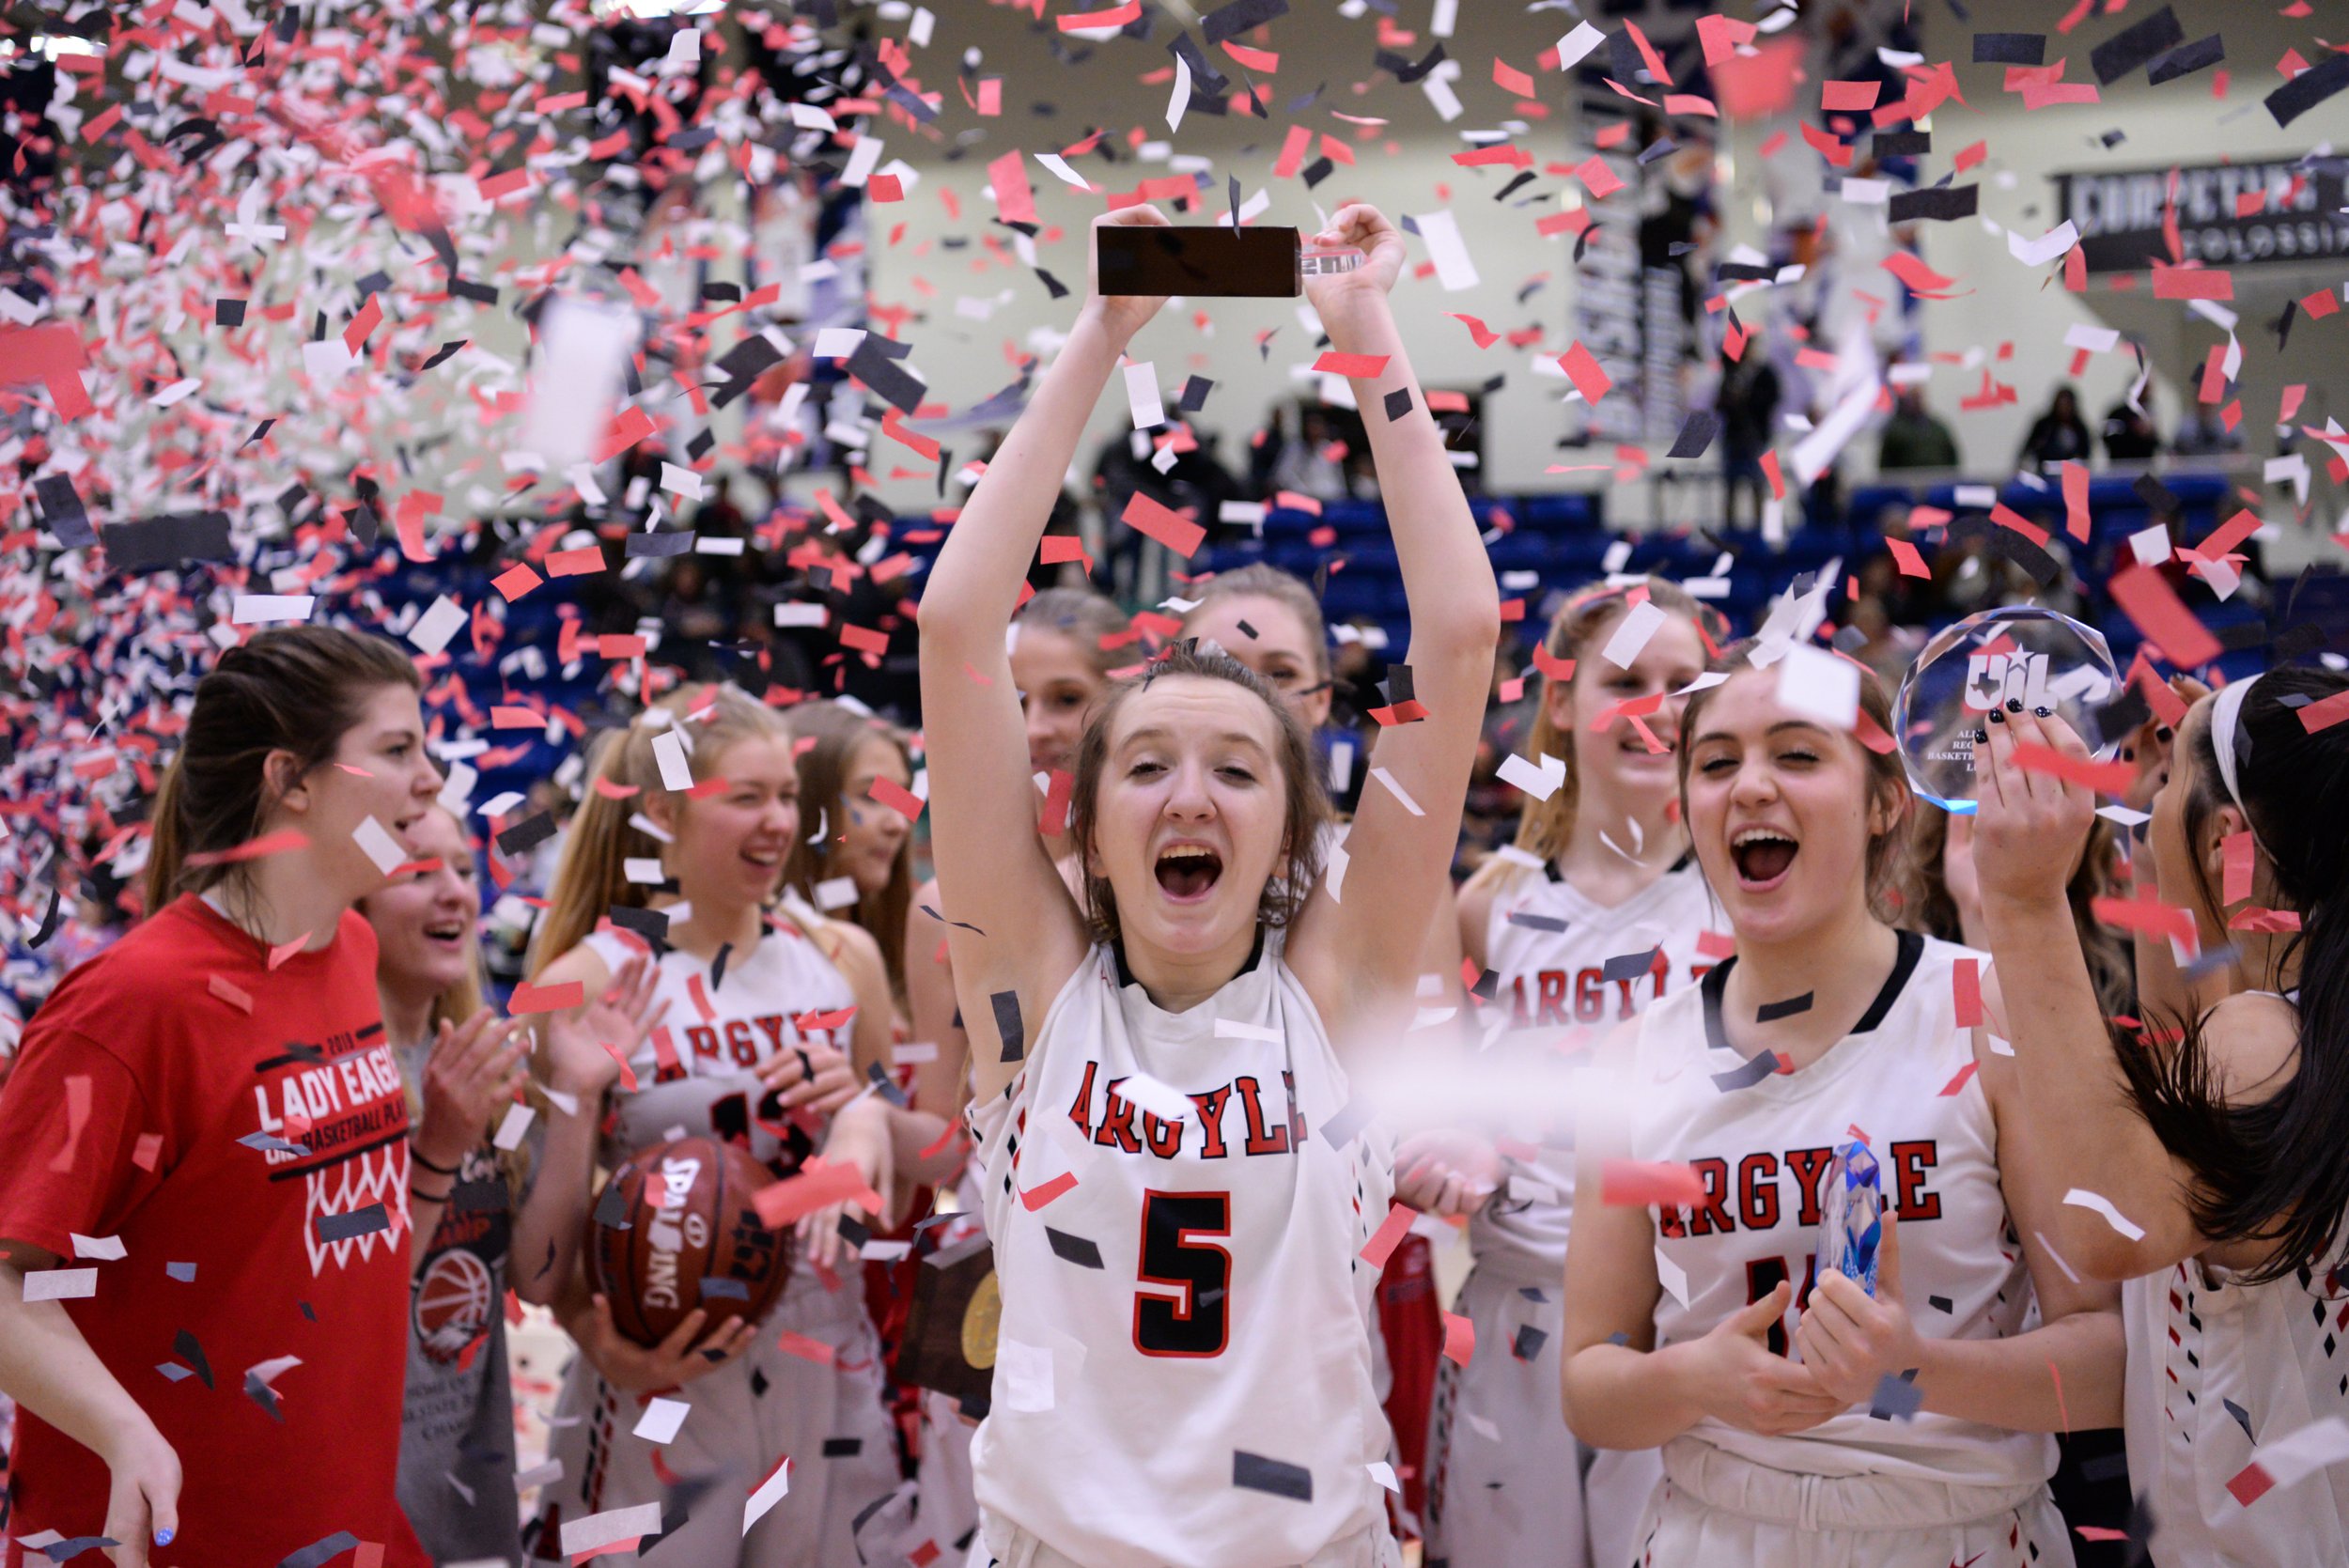  Argyle's Rhyle McKinney (5) celebrates winning the 4A Region 1 championship game and most valuable player against Levelland Friday, Feb. 22, 2019 at Rip Griffin Center in Lubbock, TX. Argyle defeated Levelland 52-37. [Abbie Burnett] 